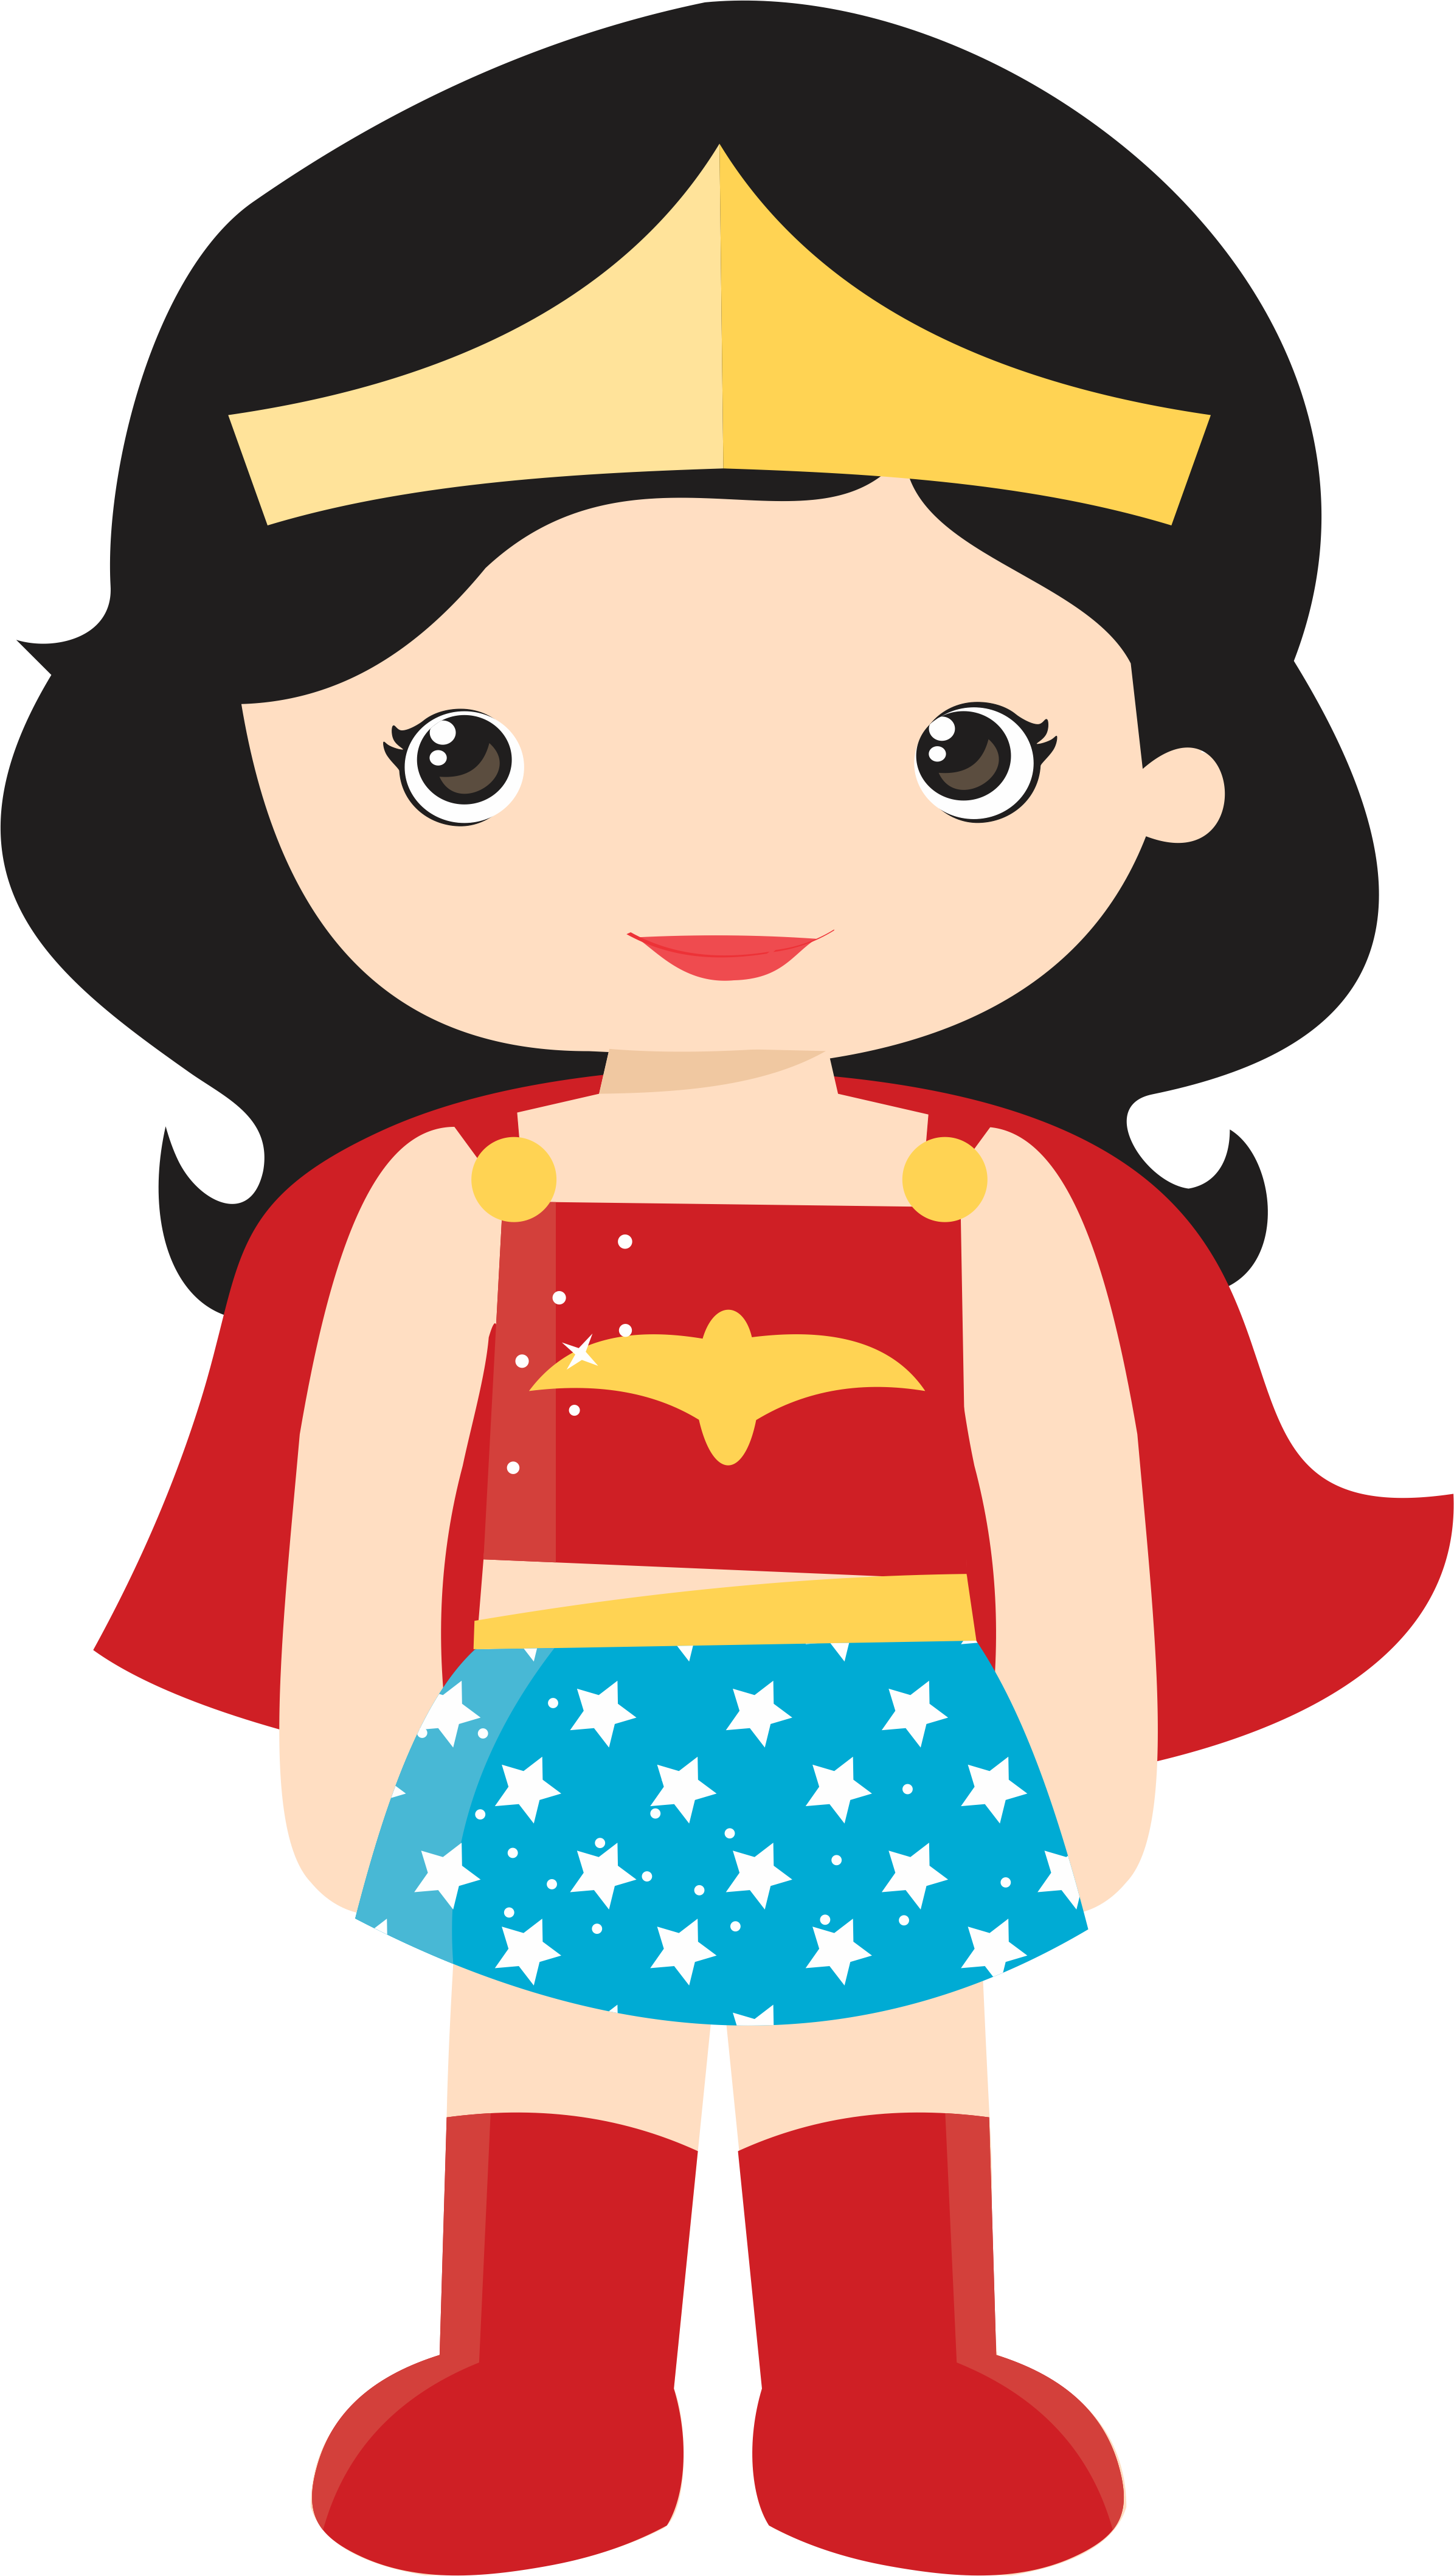 Supergirl clipart supe boy. Pin by ashley earnest